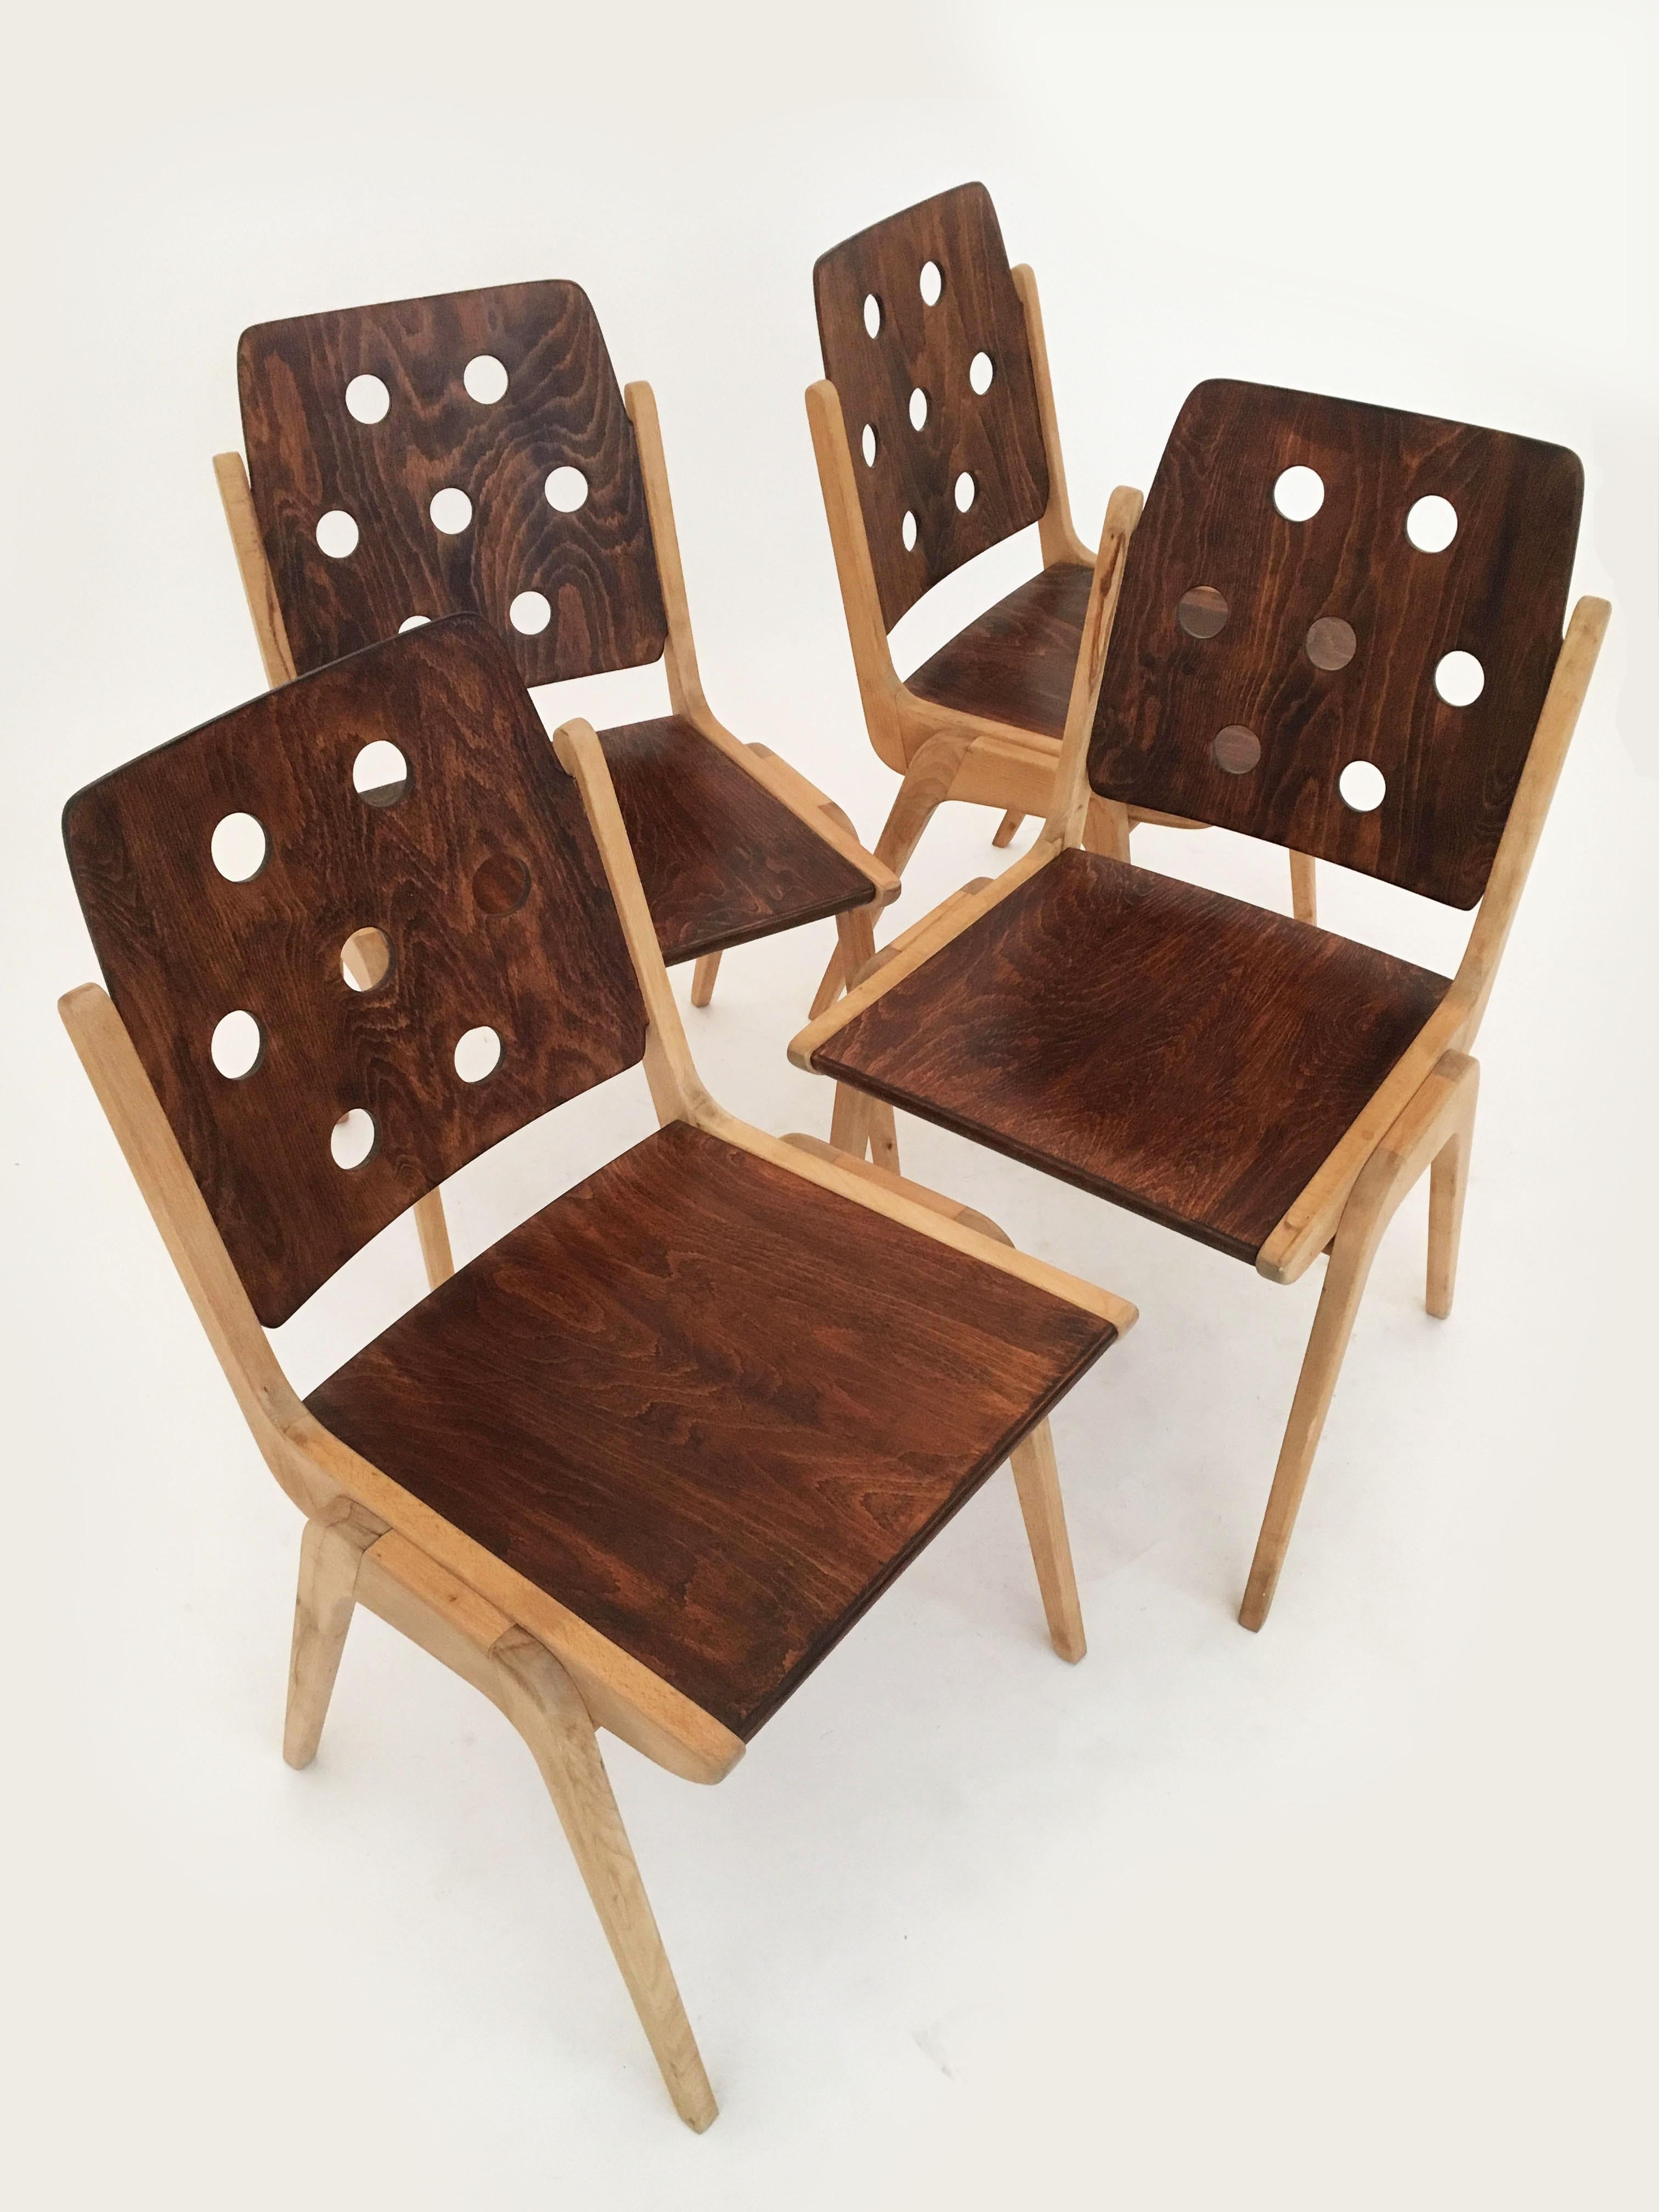 Set of 12 Stacking Dining Chairs Franz Schuster, Duo-Colored, Austria, 1950s For Sale 3